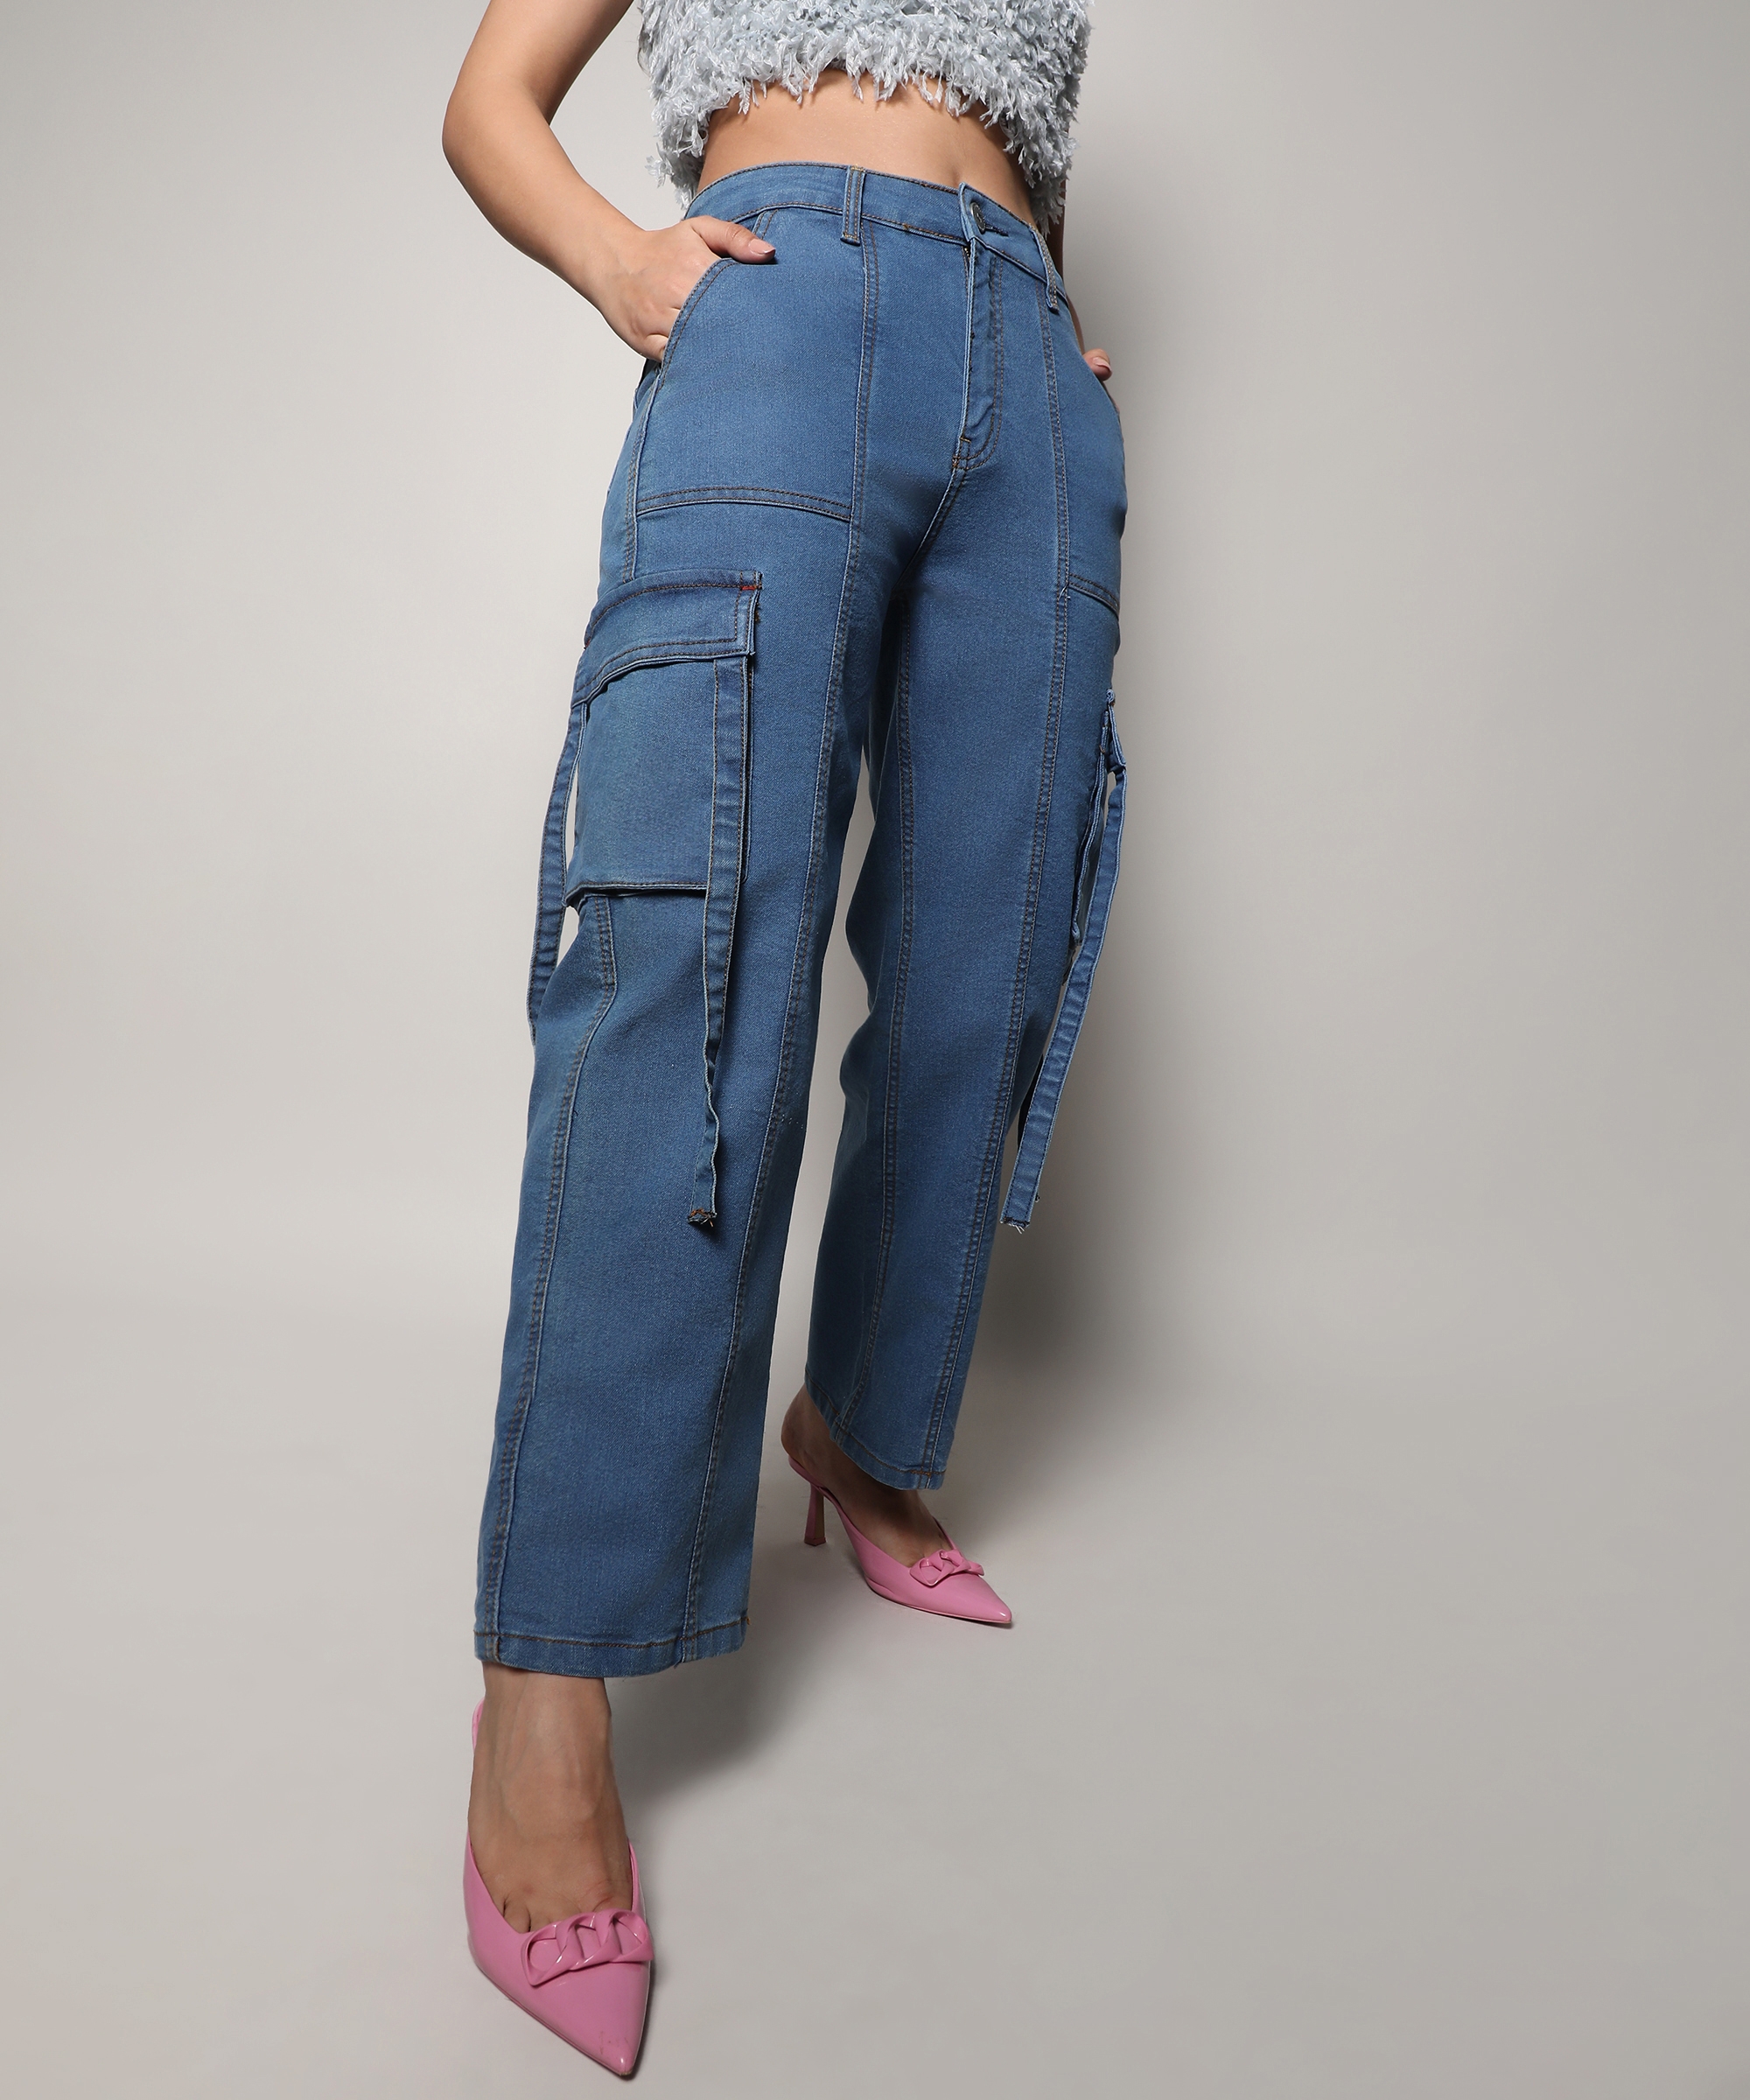 CAMPUS SUTRA | Women's Prussian Blue Solid Wide Leg Jeans